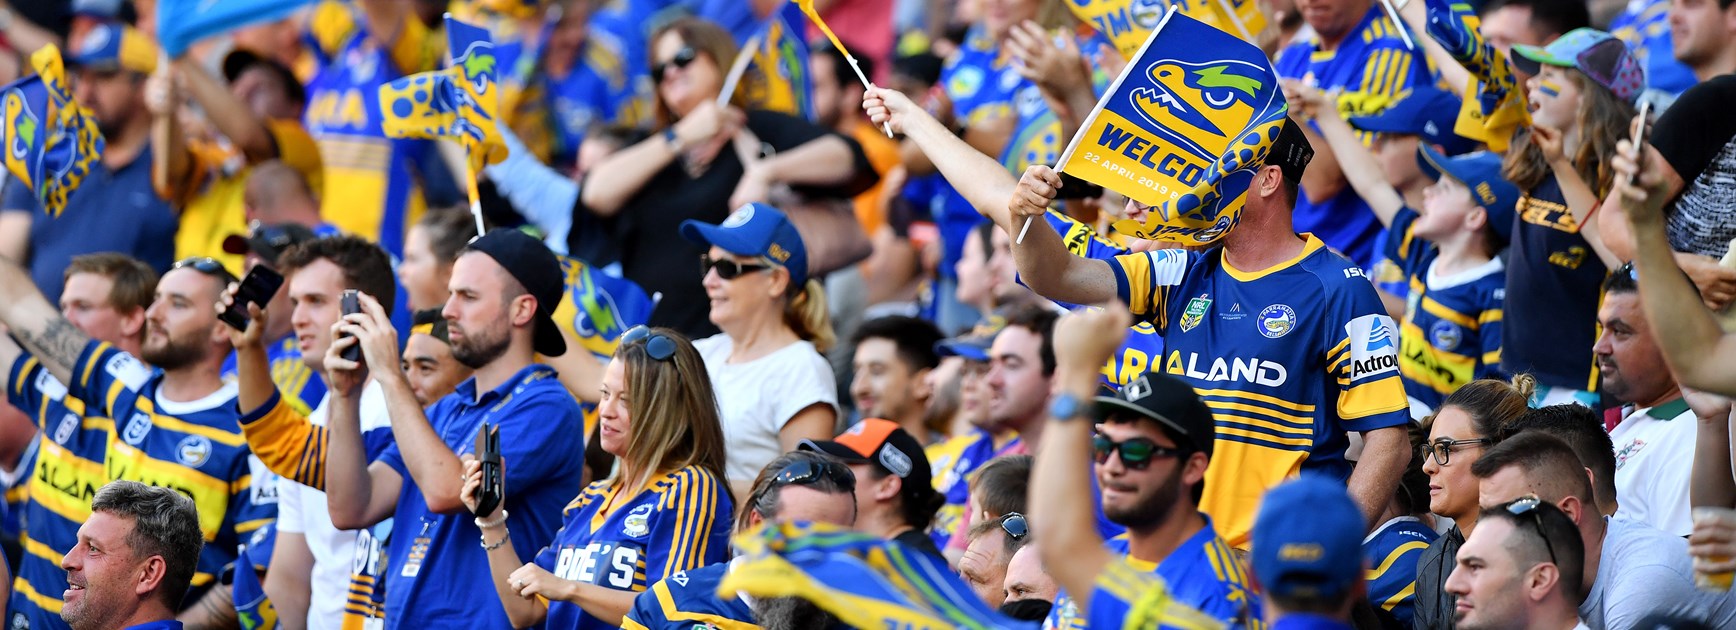 Parramatta Eels round 8 match at Bankwest Stadium almost sold out